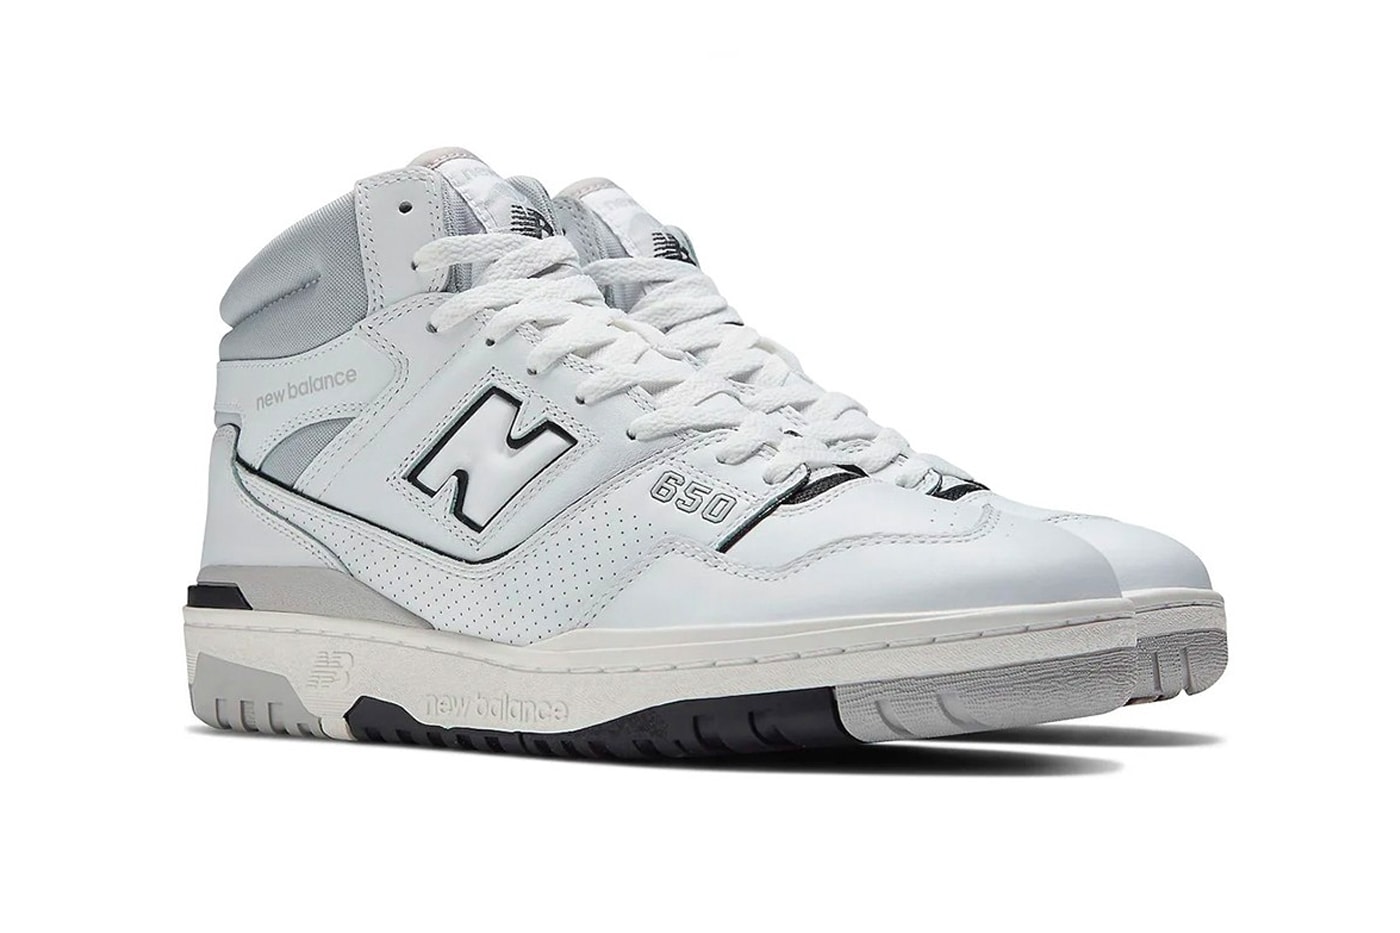 New Balance 650 Surfaces in Muted Greyscale Colorway BB650RWC high tops release info basketball shoes 550s